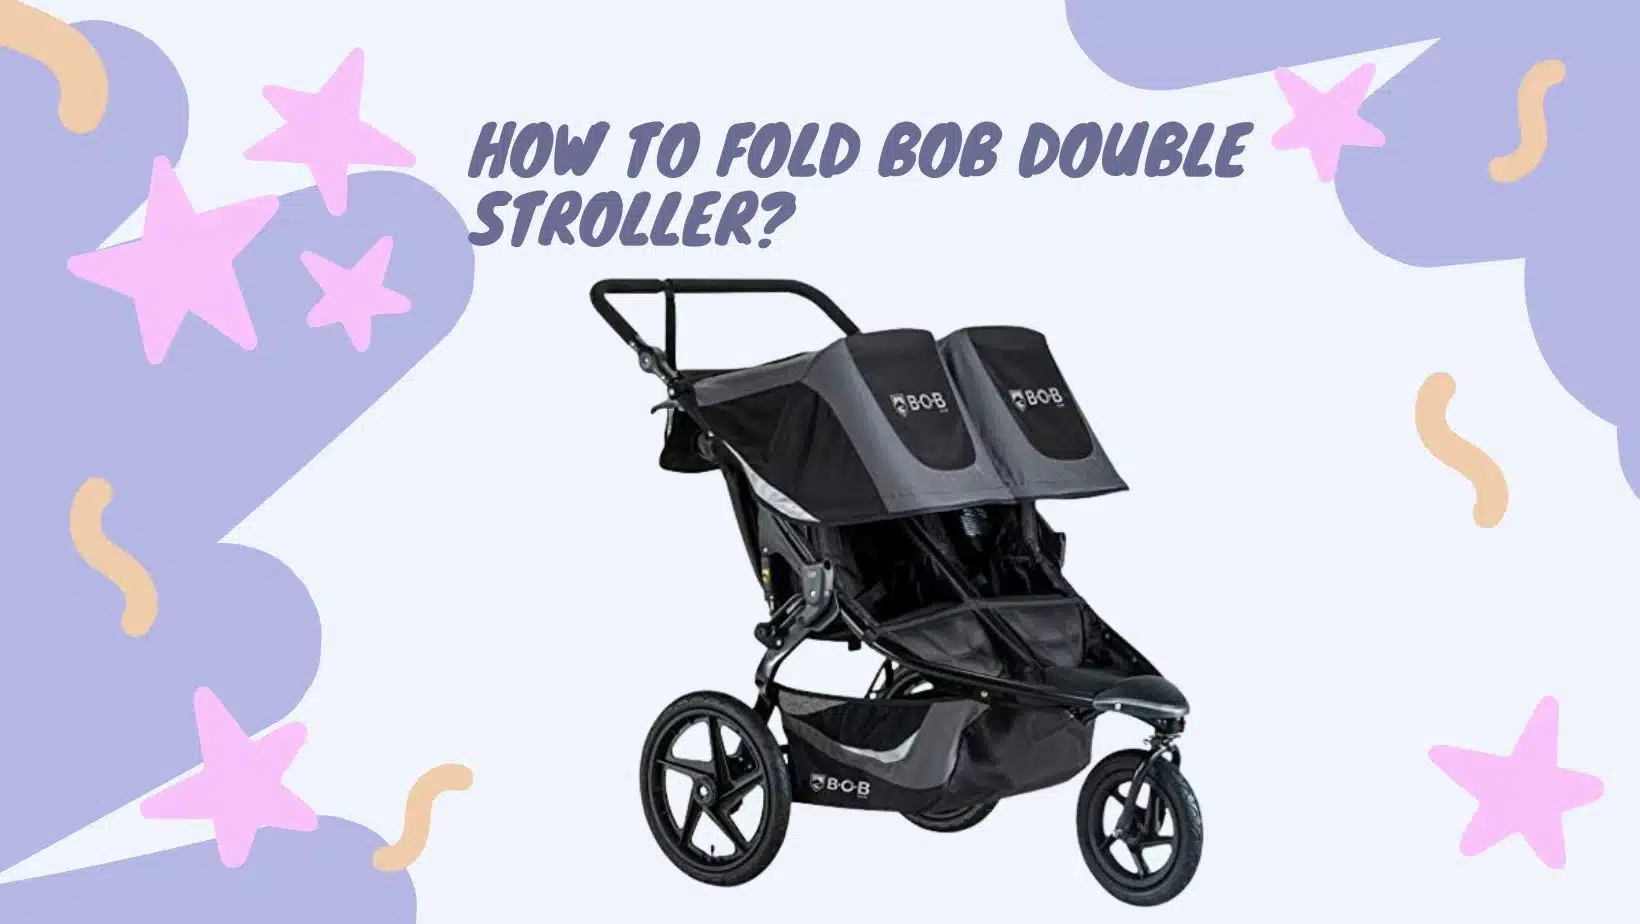 How To Fold Bob Double Stroller